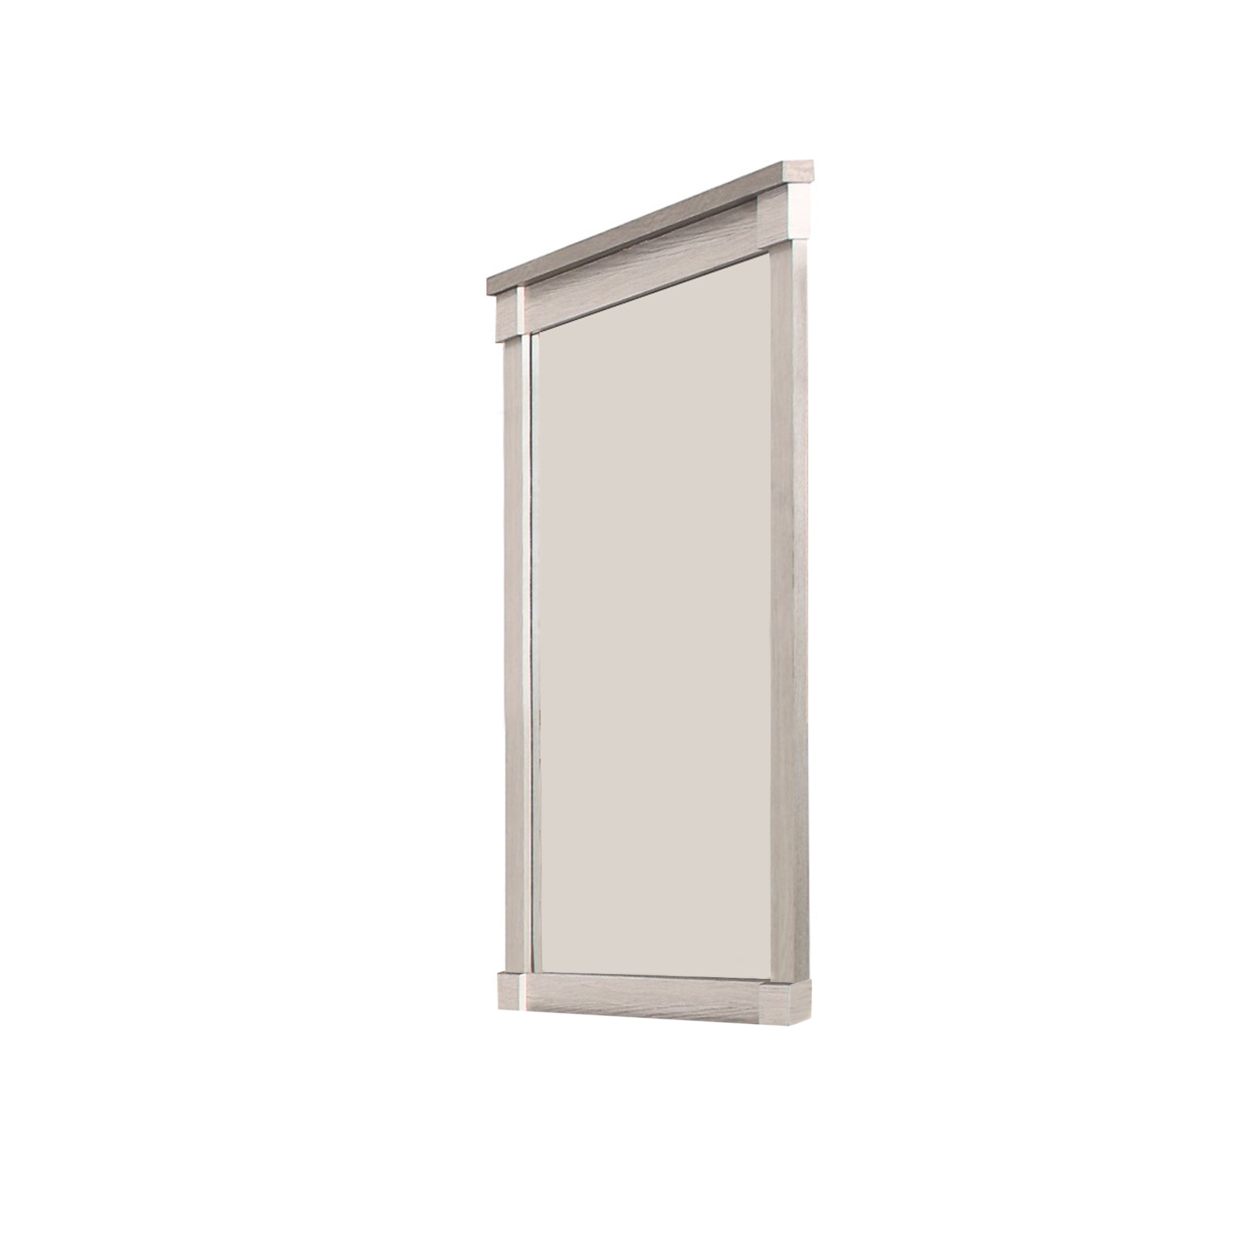 Transitional Style Wooden Frame Mirror With Projected Top, White- Saltoro Sherpi